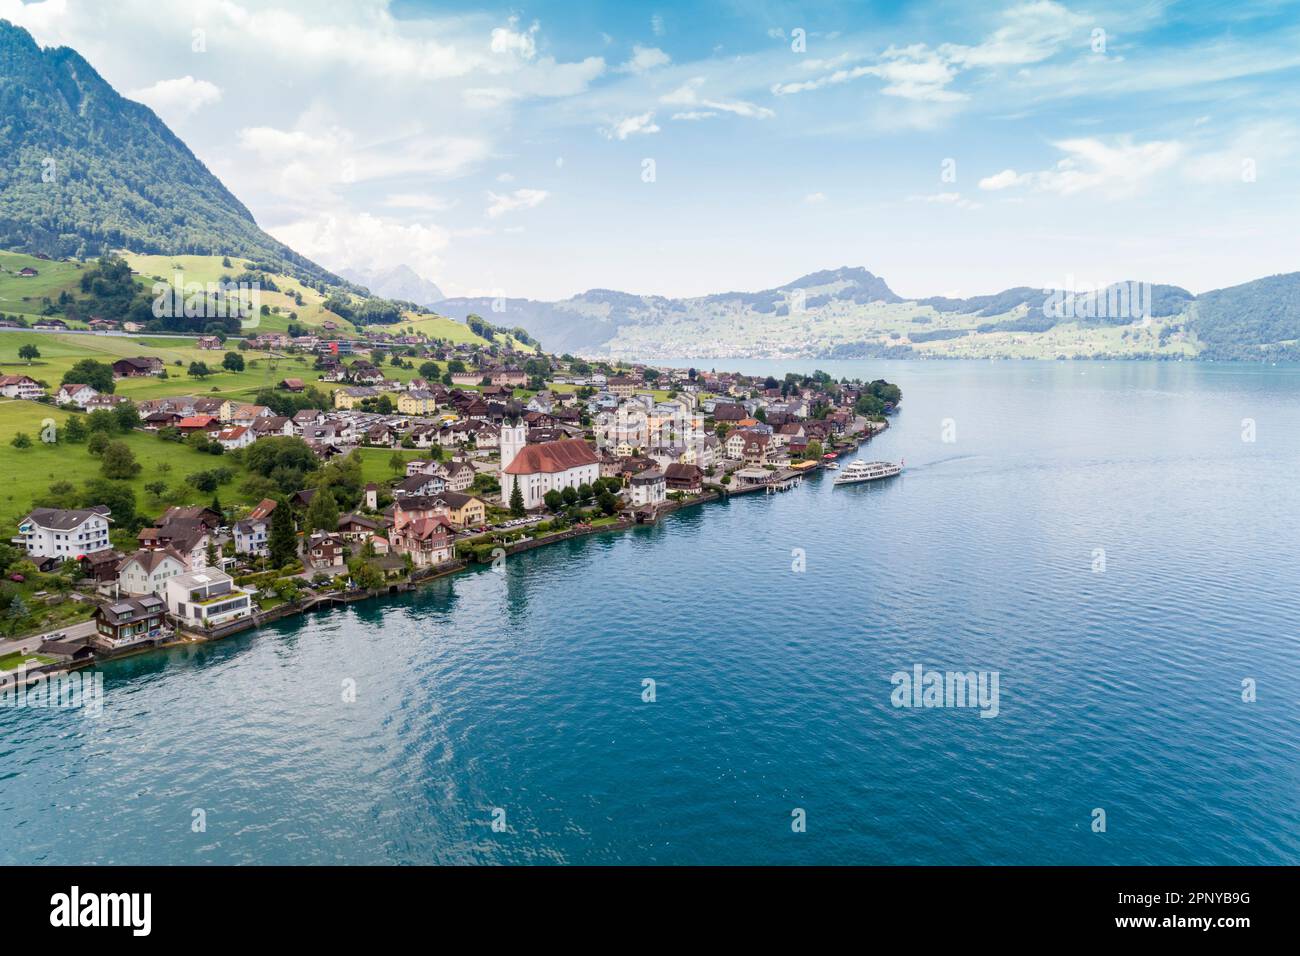 Aerial view of Beckenried on Lake Lucern, Switzerland Stock Photo